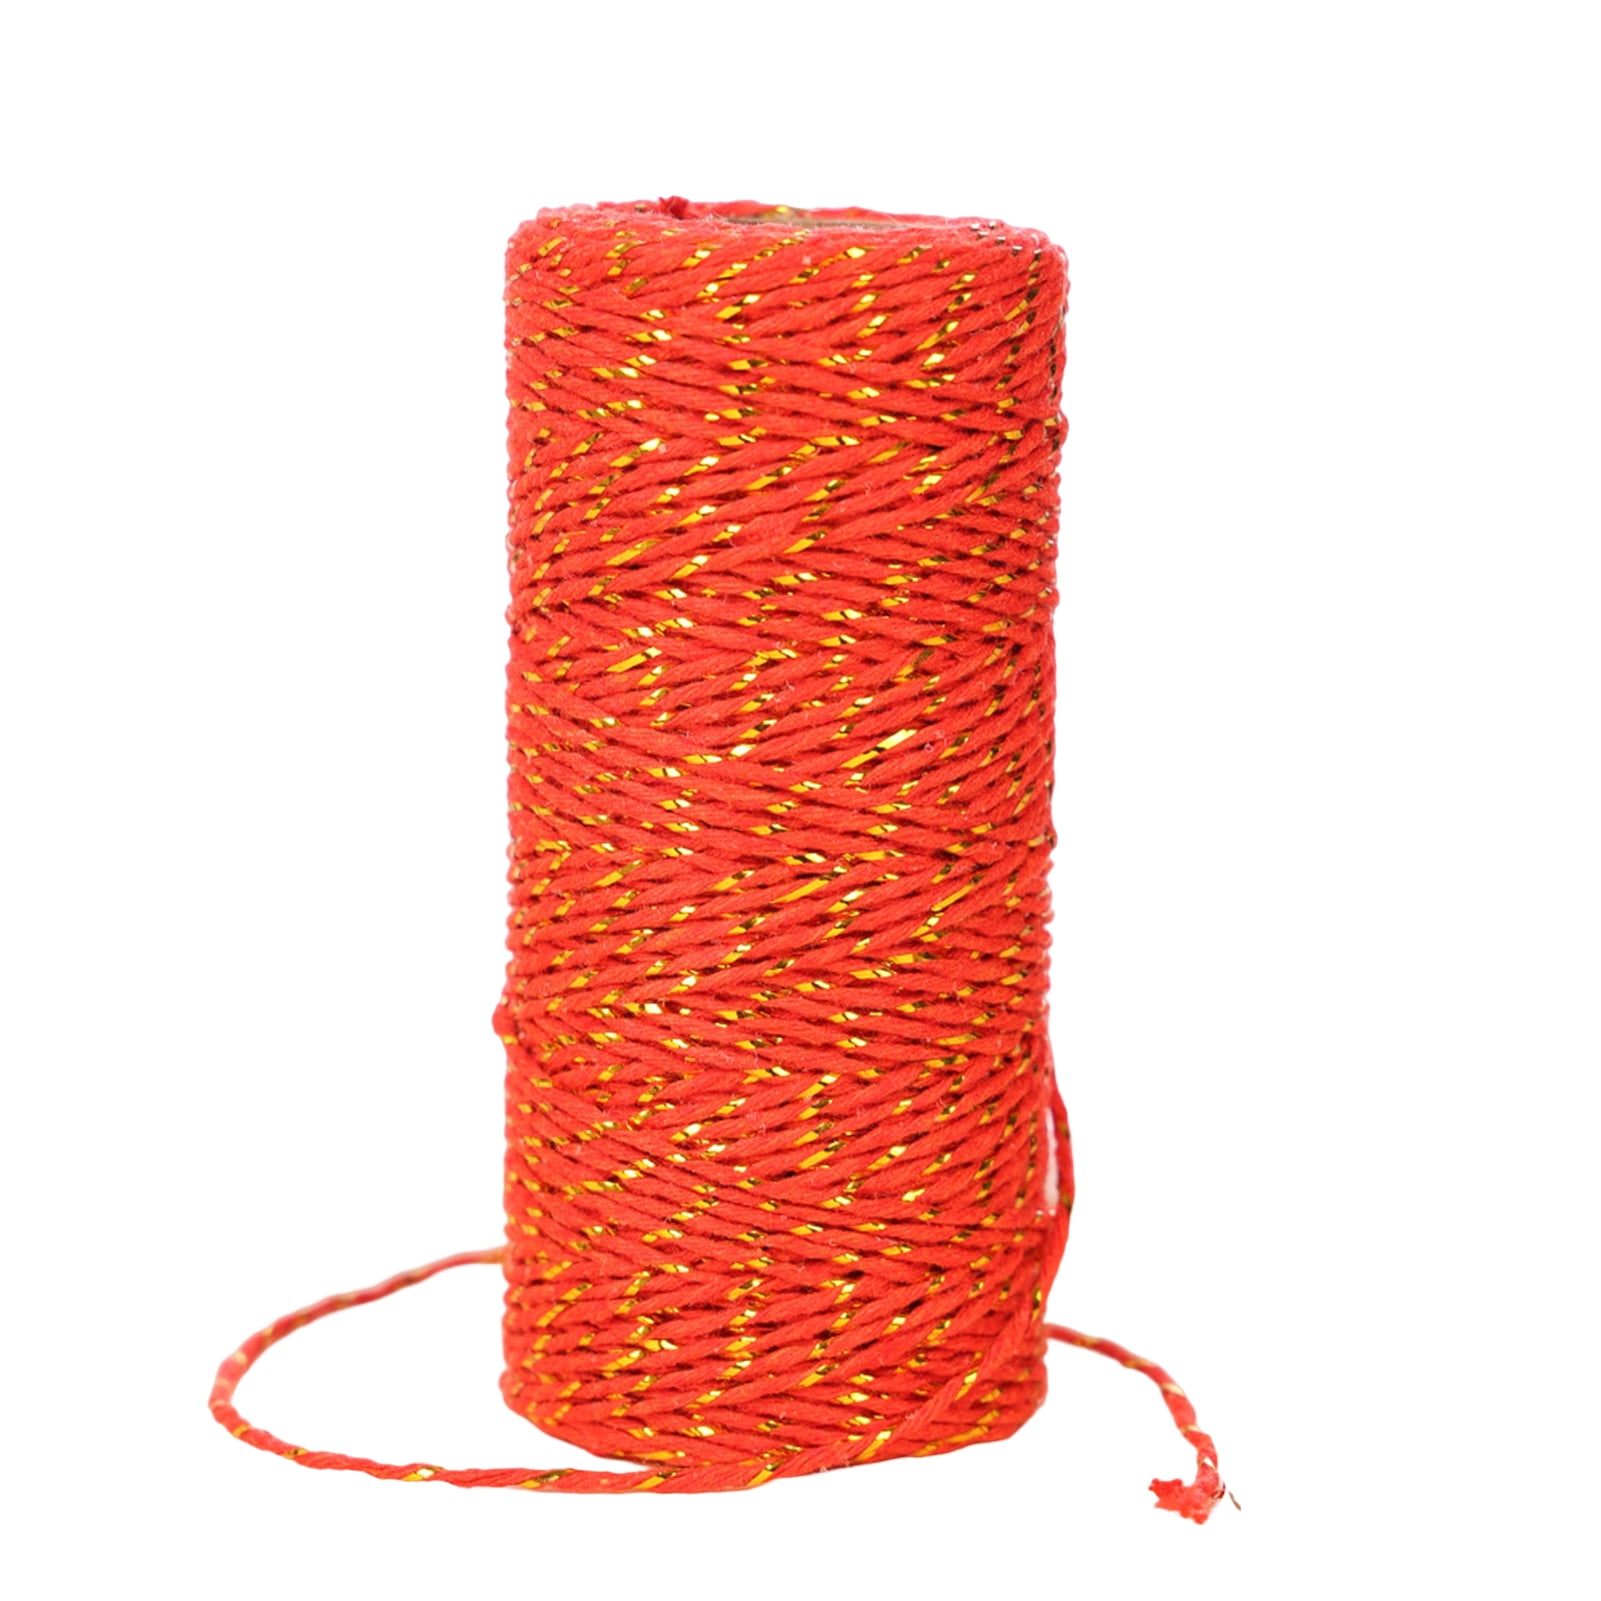 DECORA 328 Yard Bakers Twine Cord Cotton String Rope for Gift Wrapping,  Arts Crafts Pack of 6